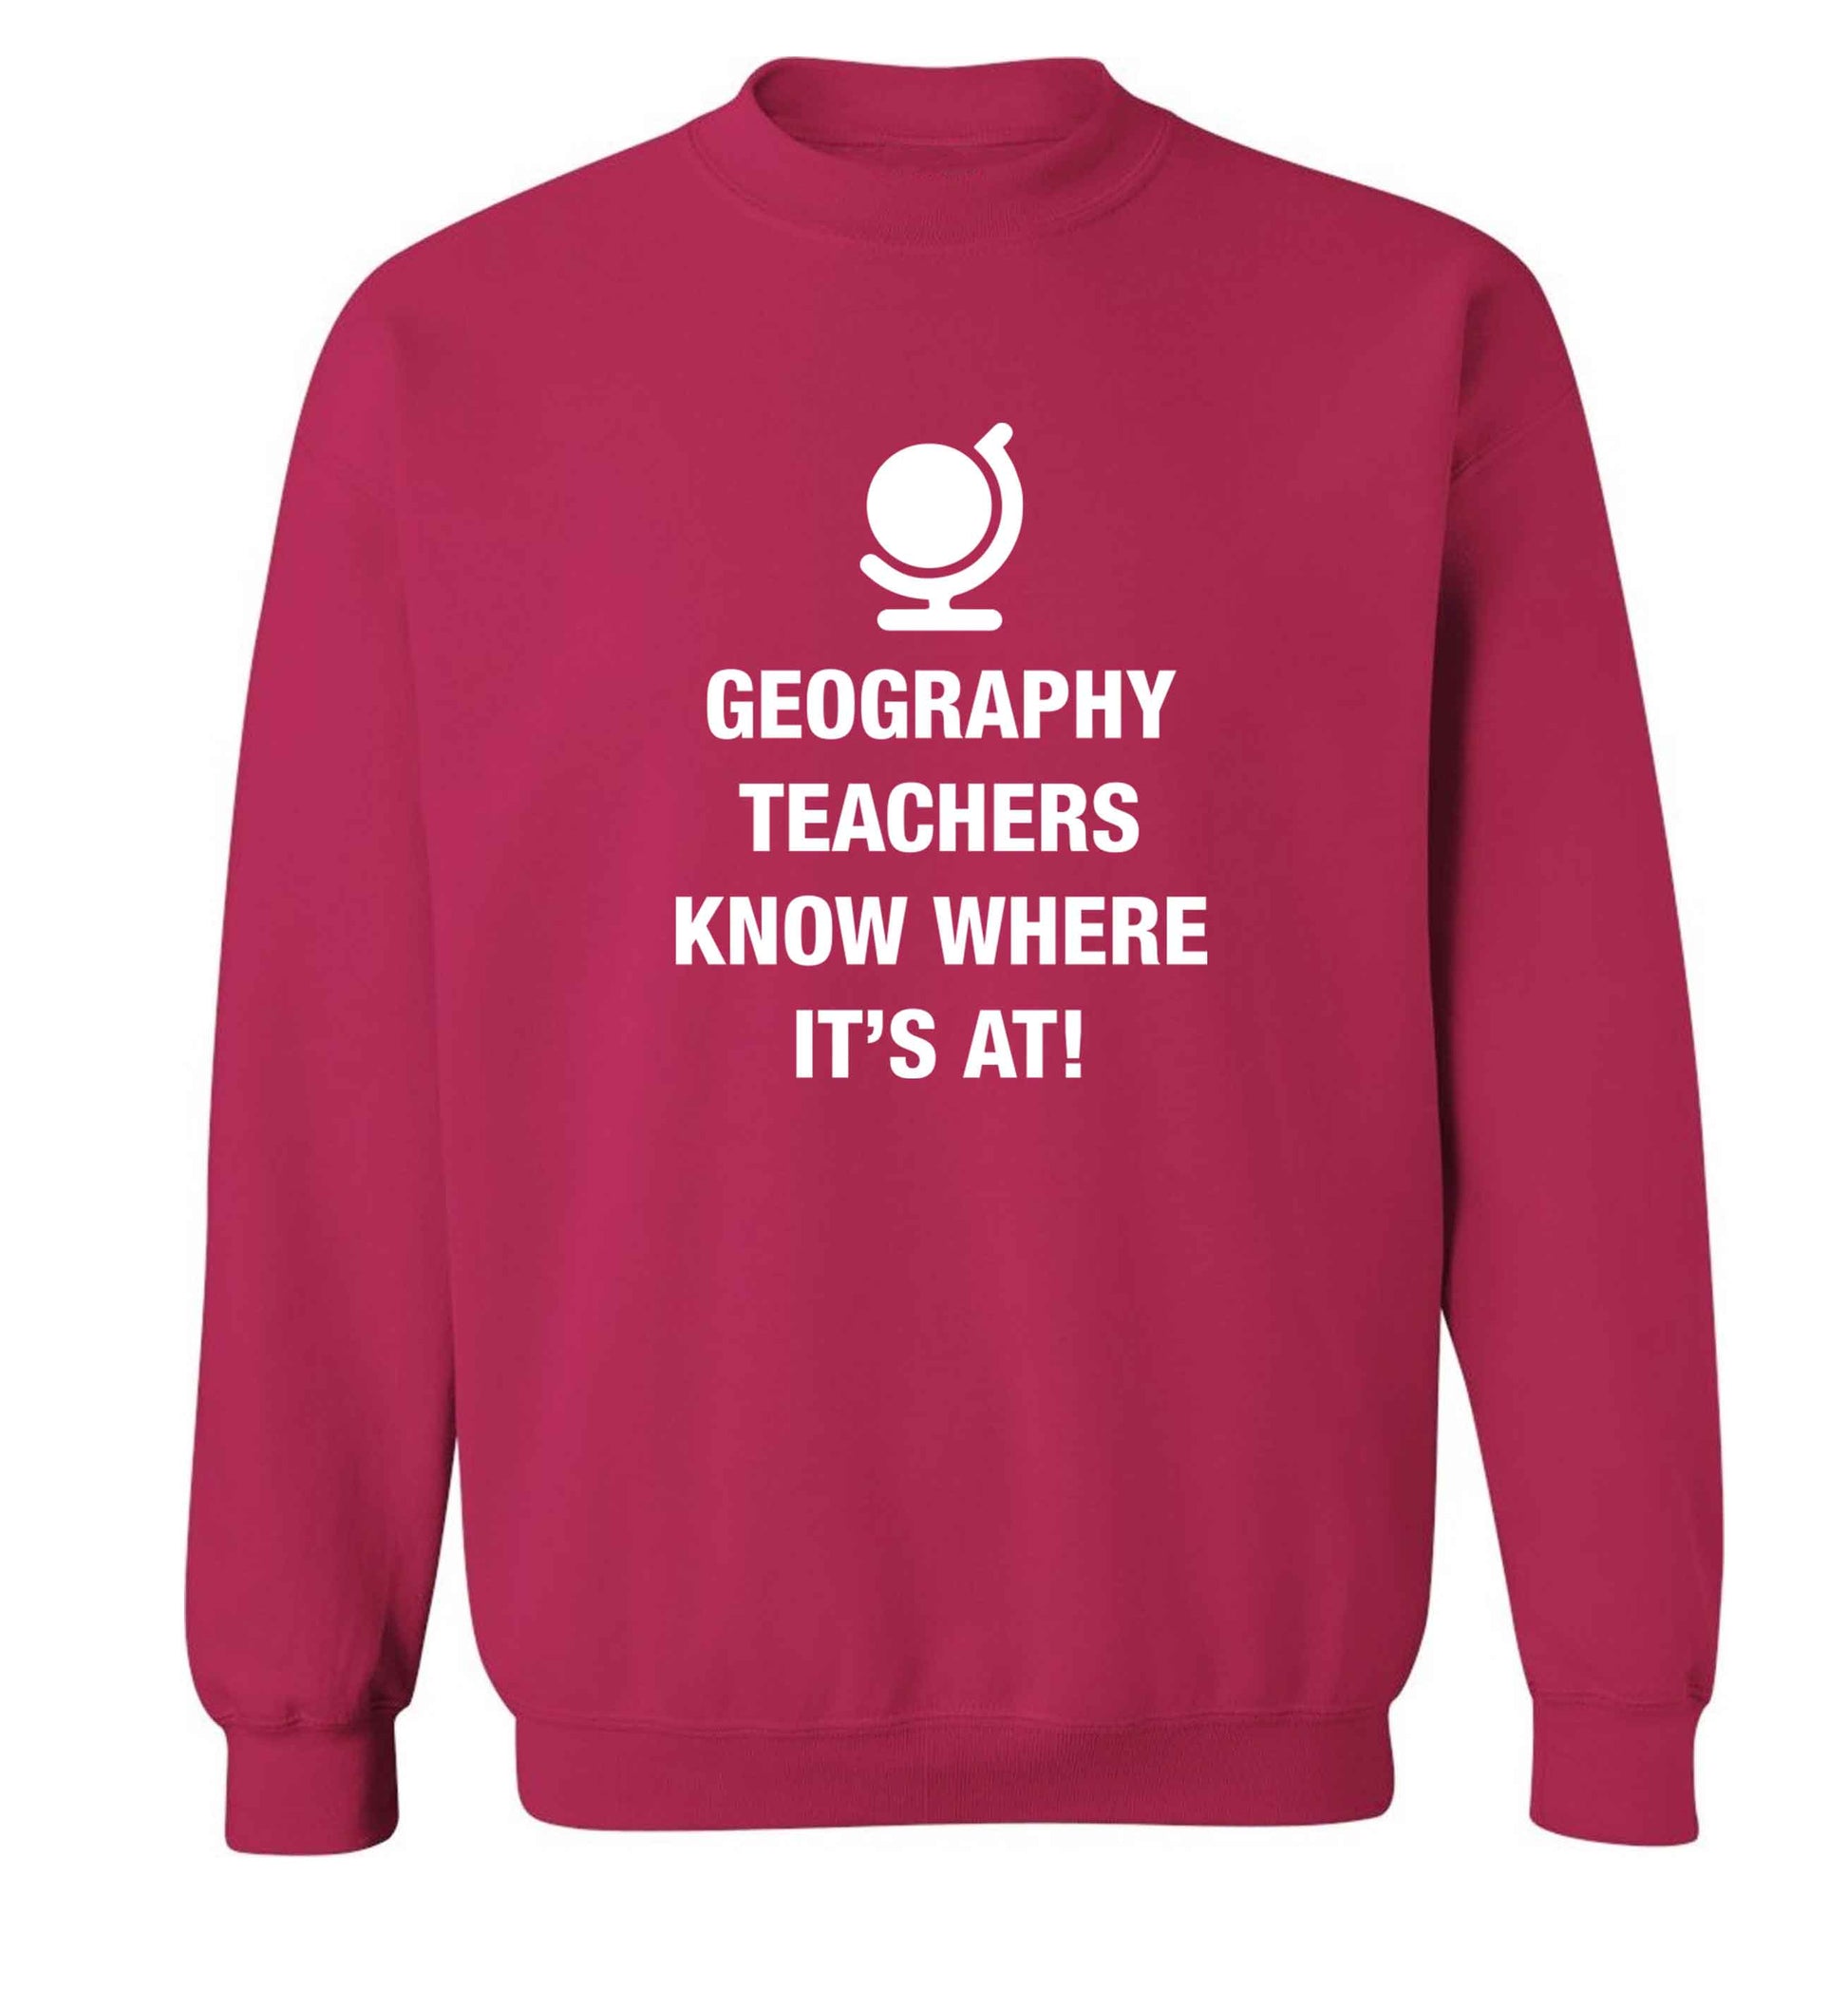 Geography teachers know where it's at adult's unisex pink sweater 2XL